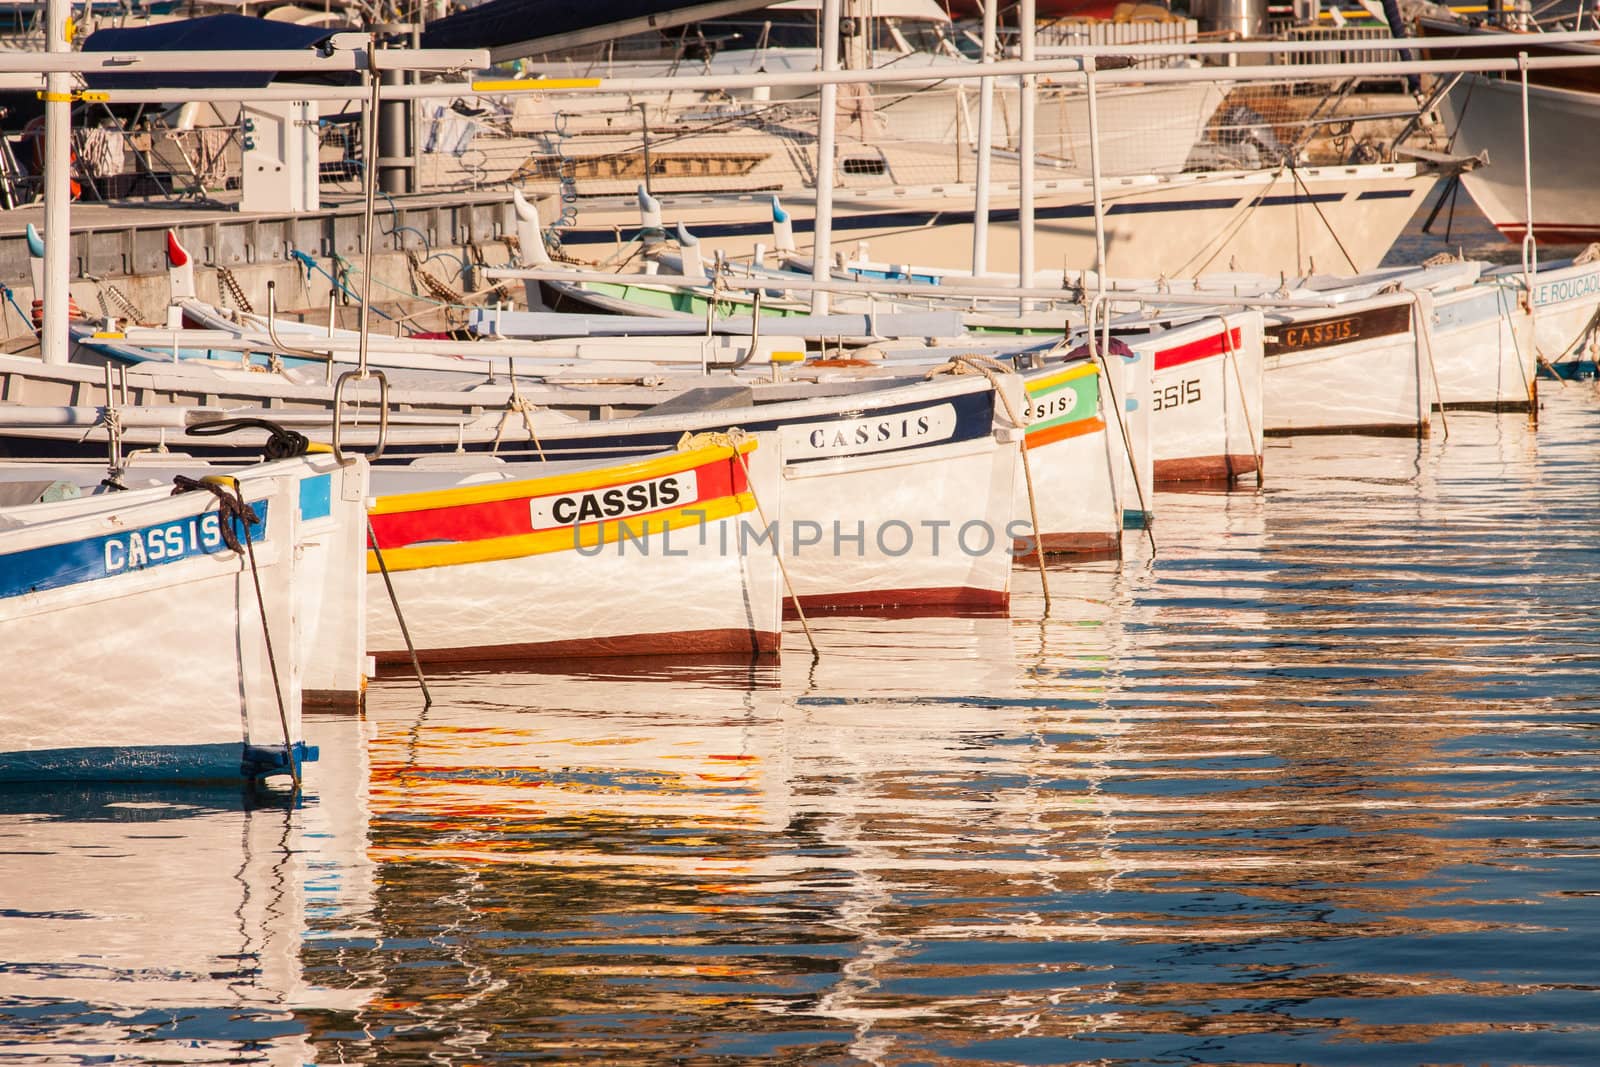 Row of colourful boats in the port which have Cassis painted on their side, and reflection can be seen on the water